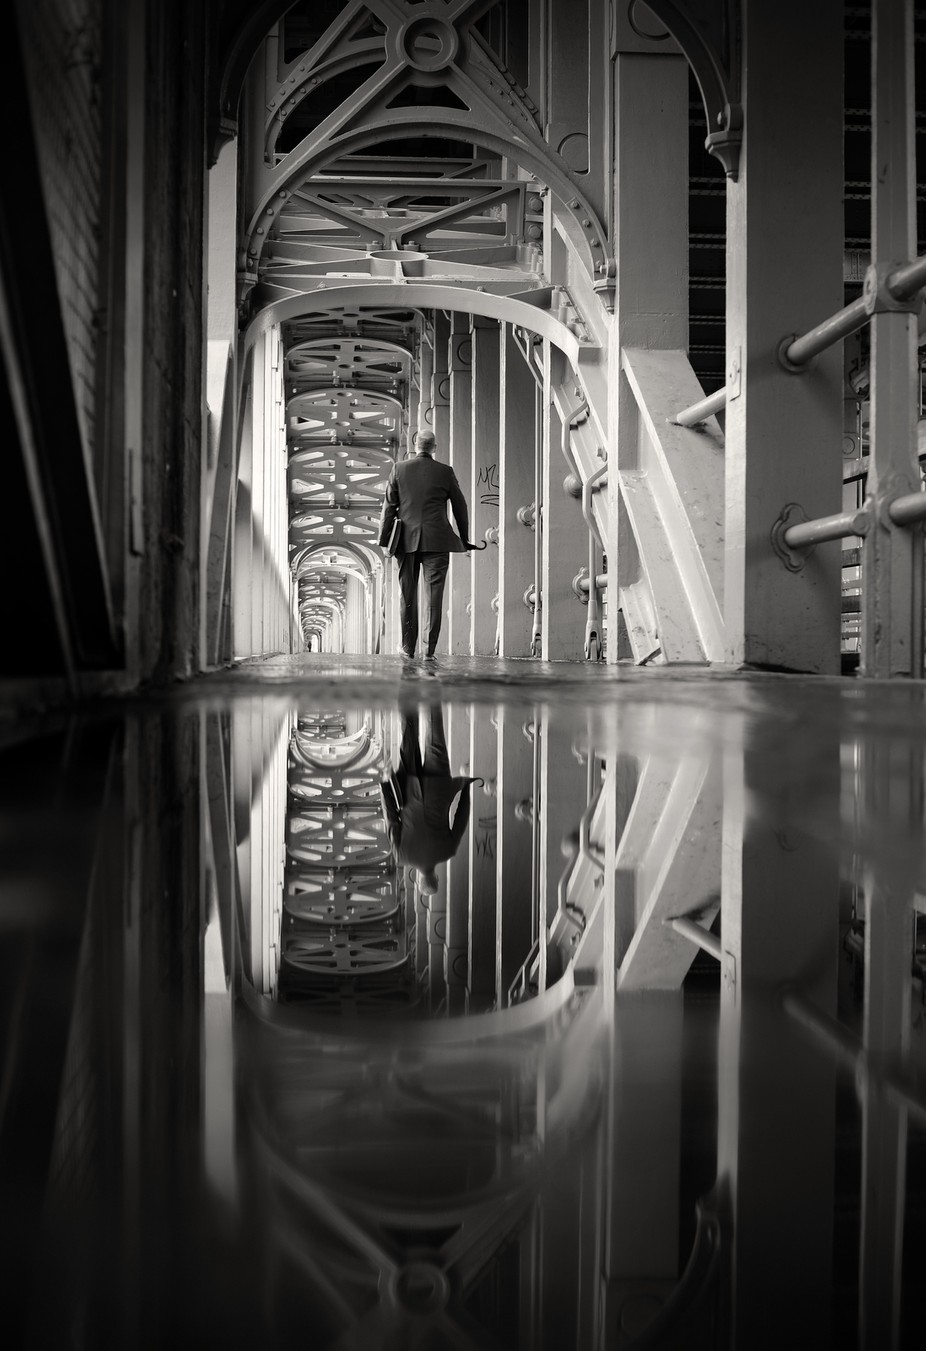 mirror man b&w by stevejackson - People In A Frame Photo Contest